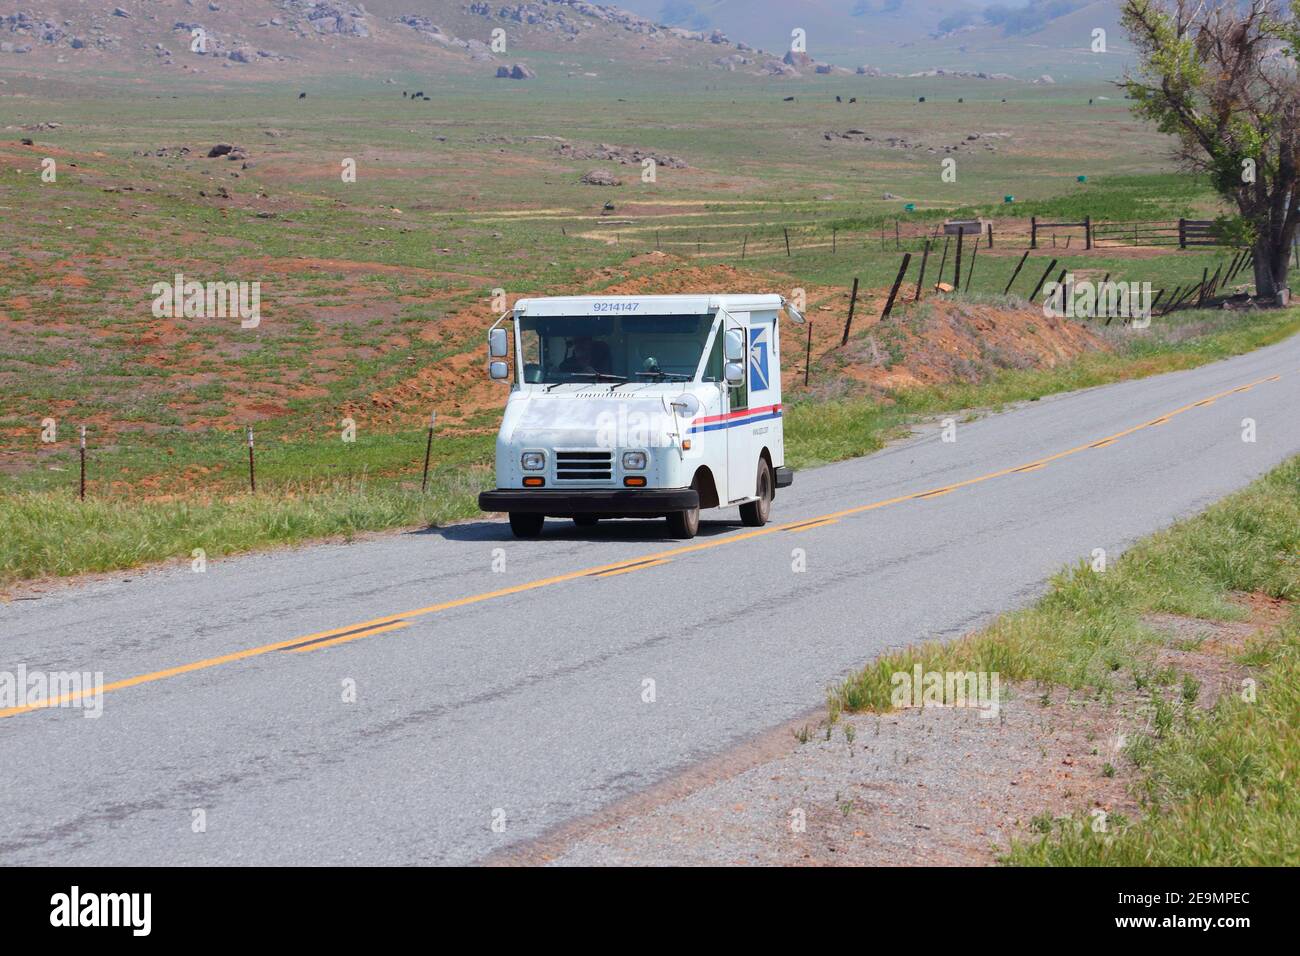 CALIFORNIA, UNITED STATES - APRIL 12, 2014: Postman drives US Postal Service van in remote rural area of Tulare County, California. USPS is the only d Stock Photo